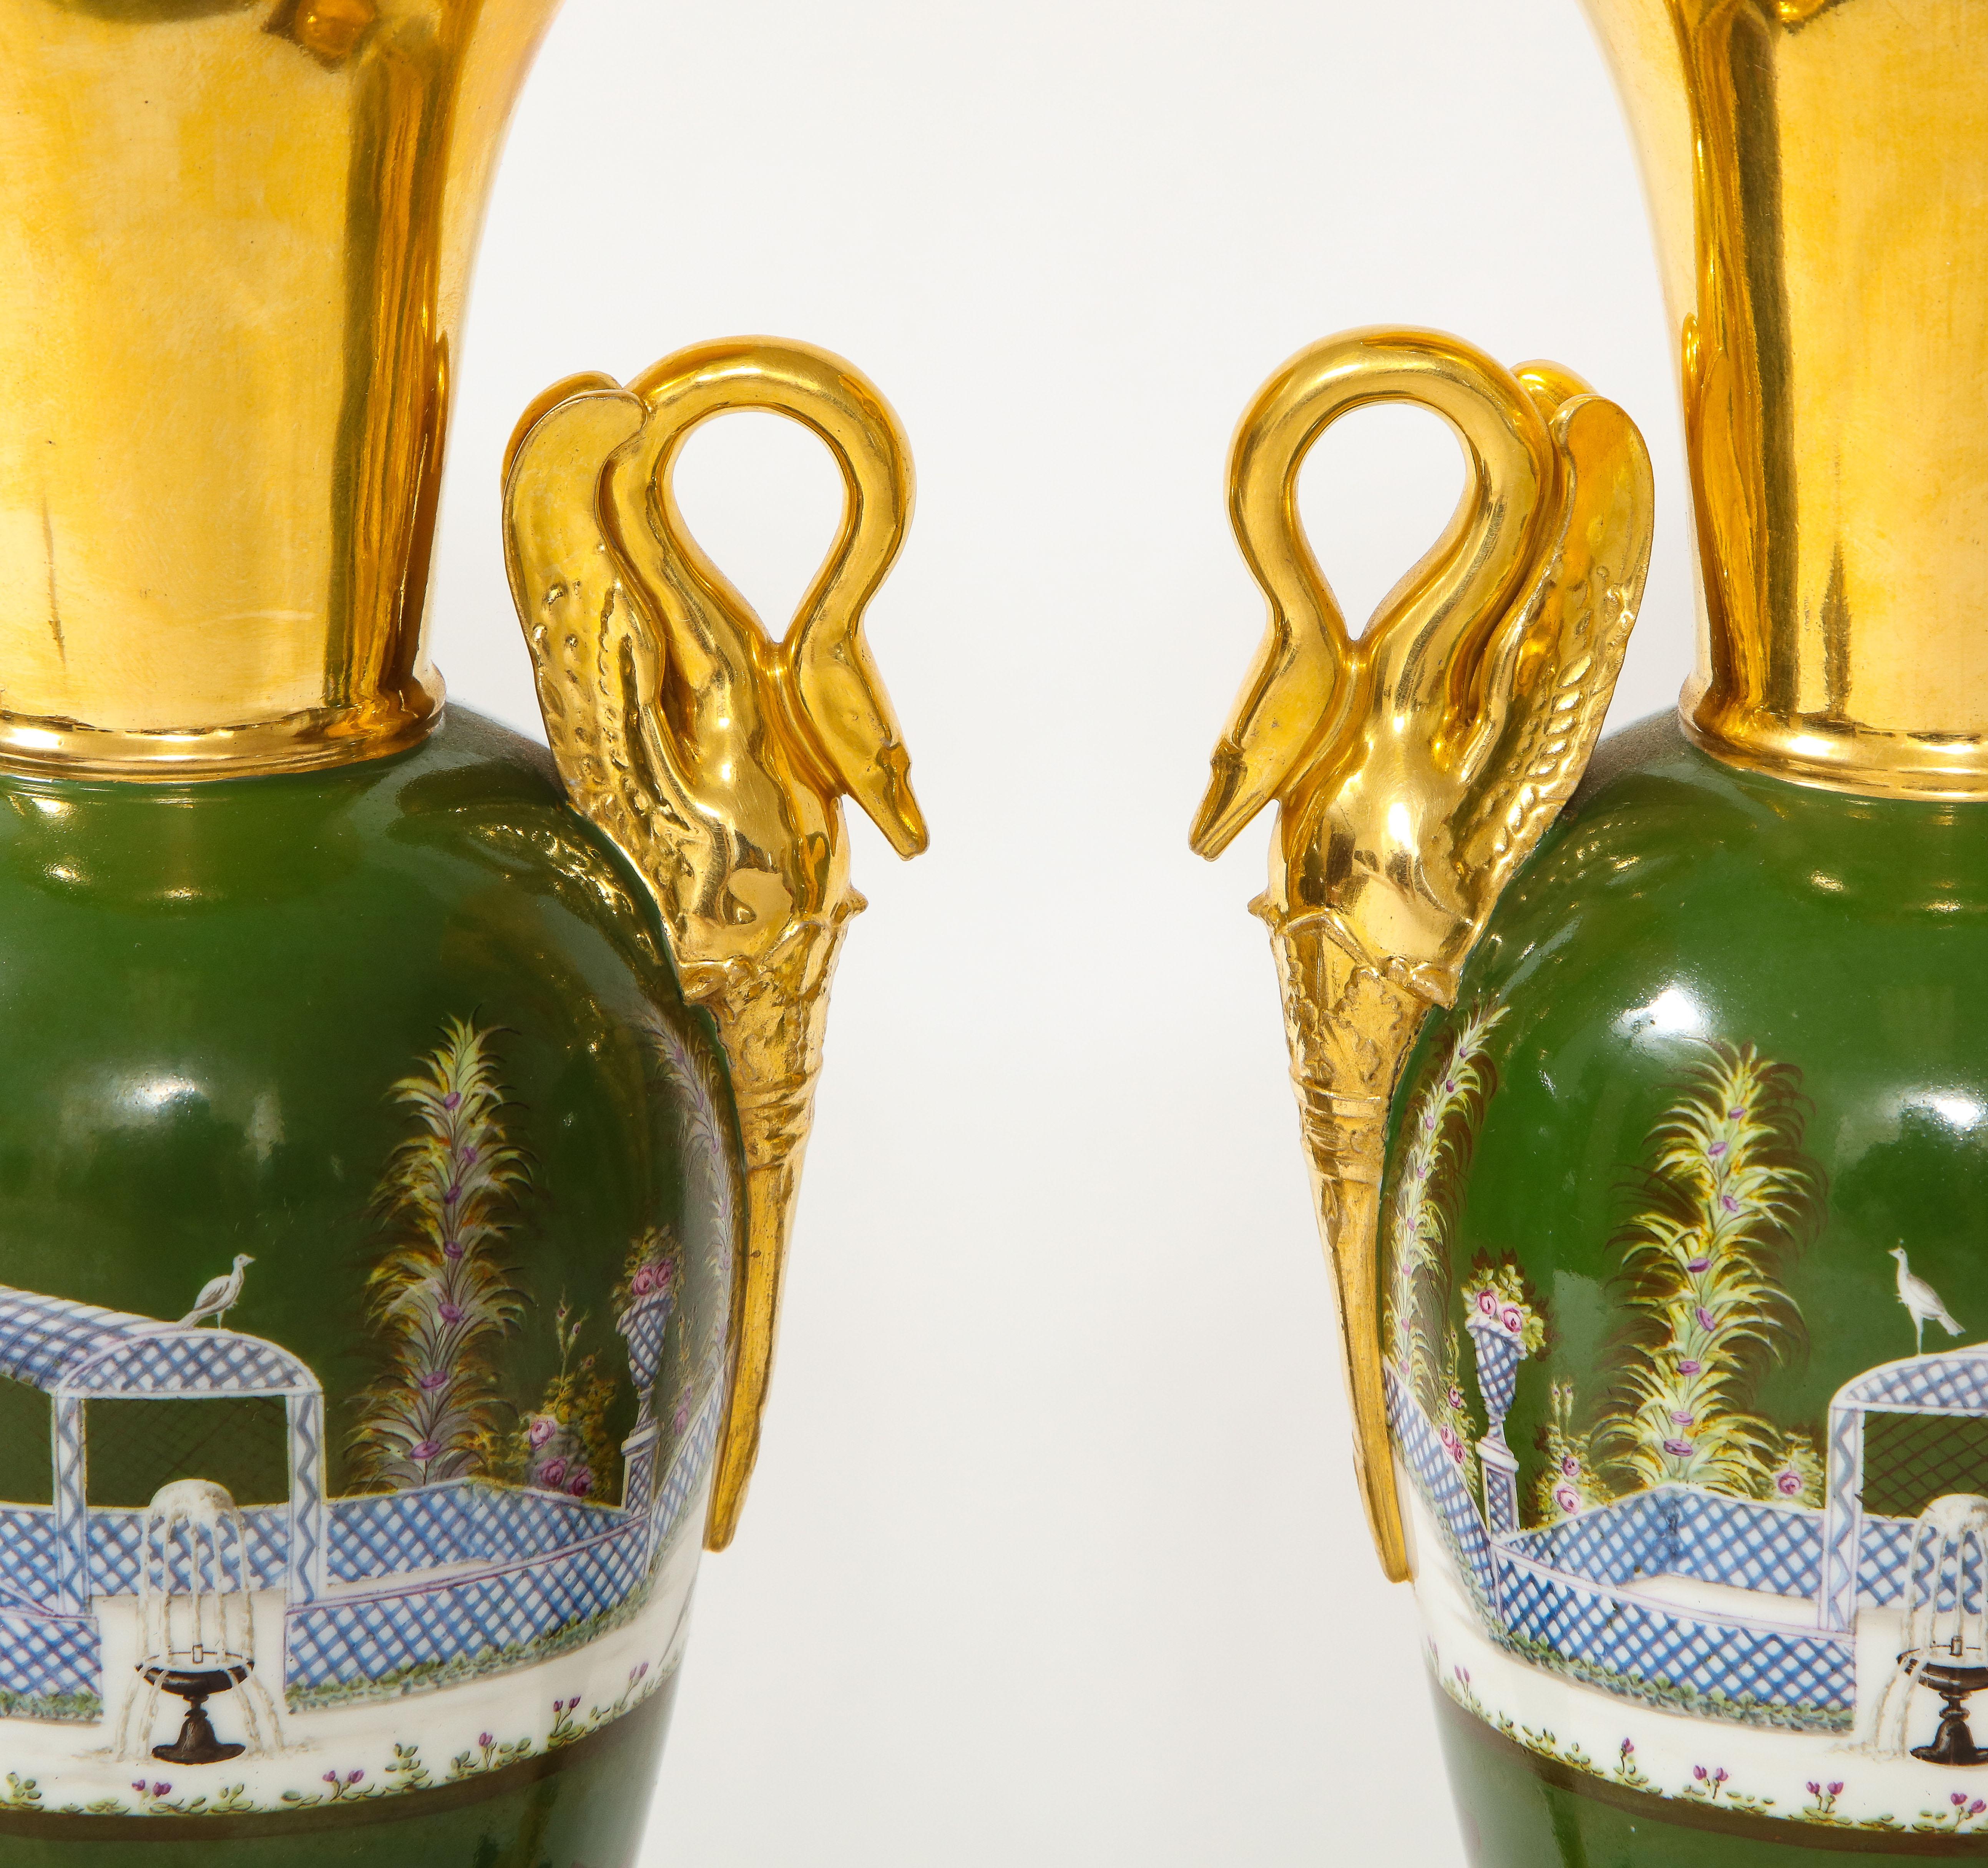 Pair of French 19th C.Empire Period Old Paris Porcelain Swan Handle Vases For Sale 2